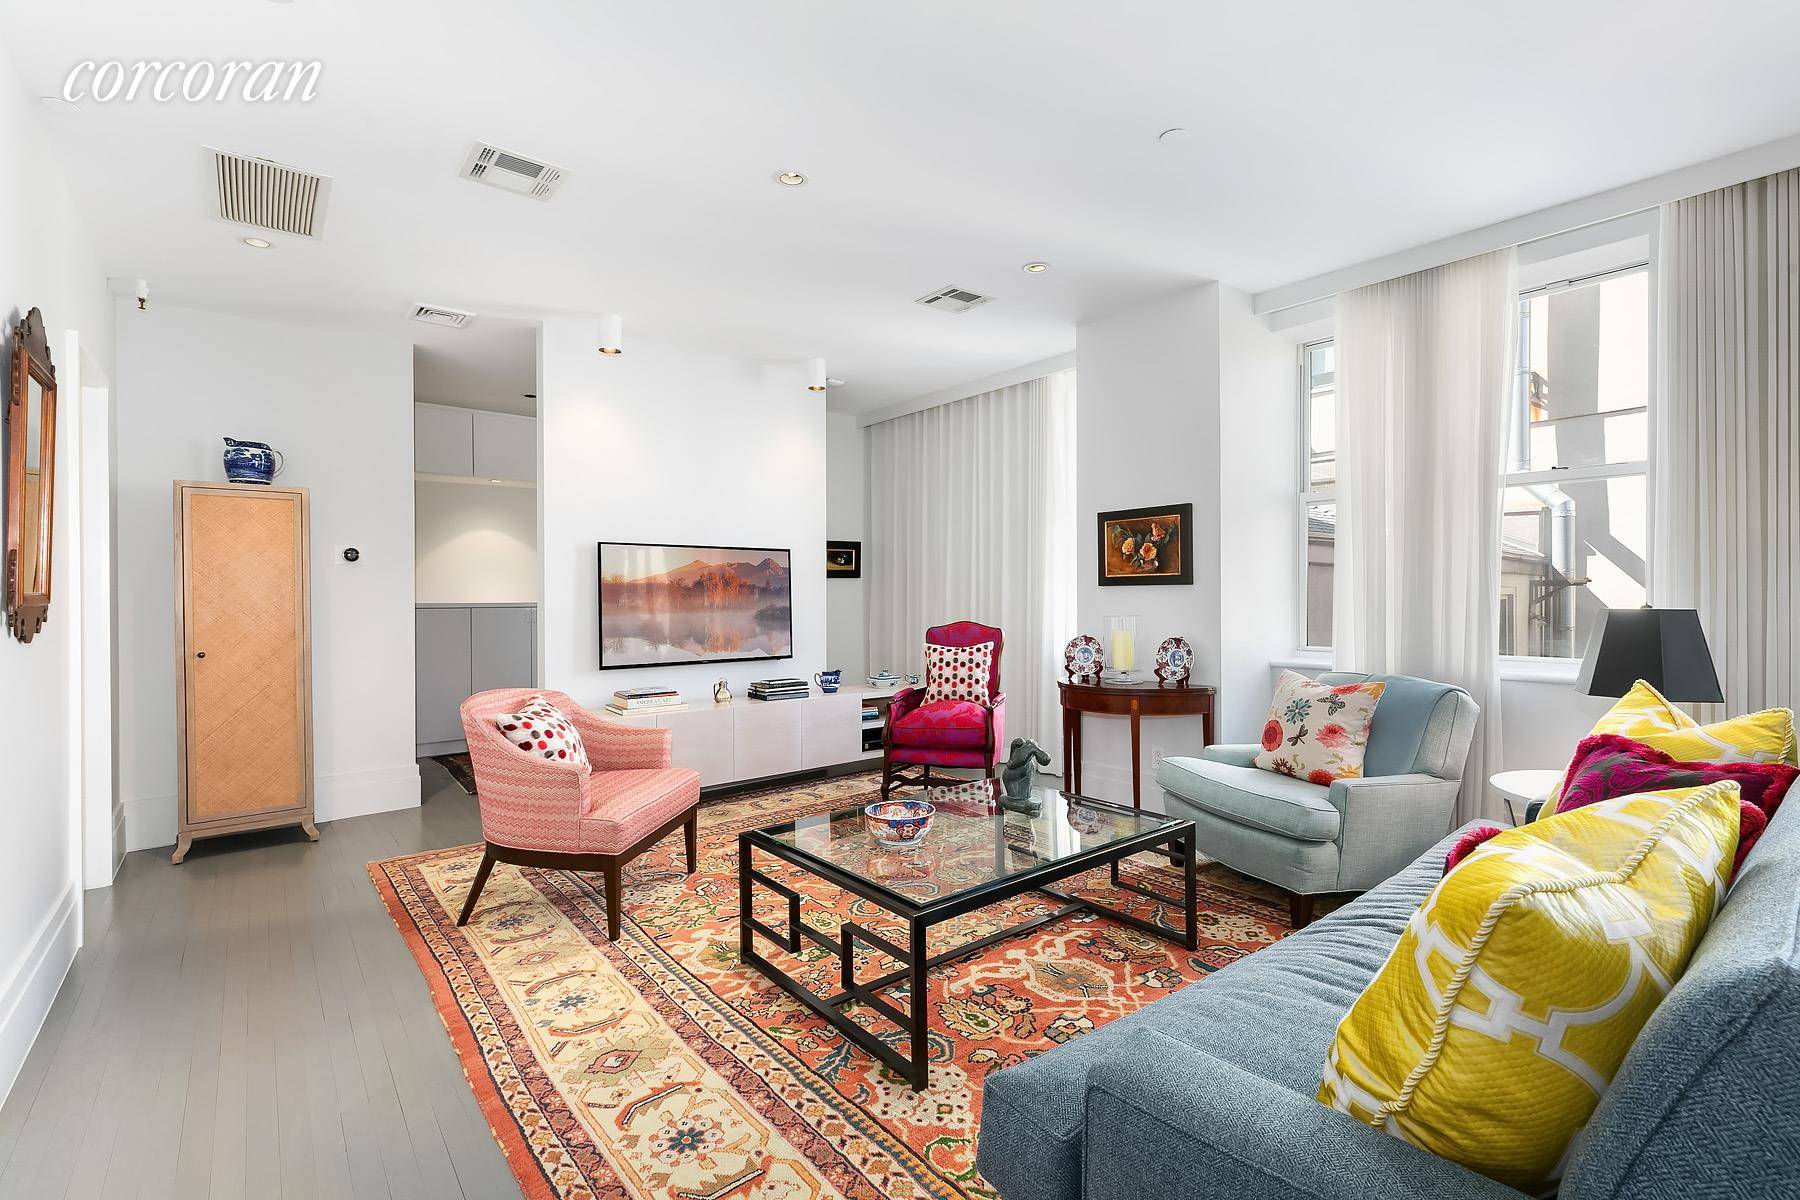 Here is a fantastic duplex condo in an amazing Cobble Hill location offering 3 bedrooms, two home offices and a den play room in its nearly 2, 000sf.